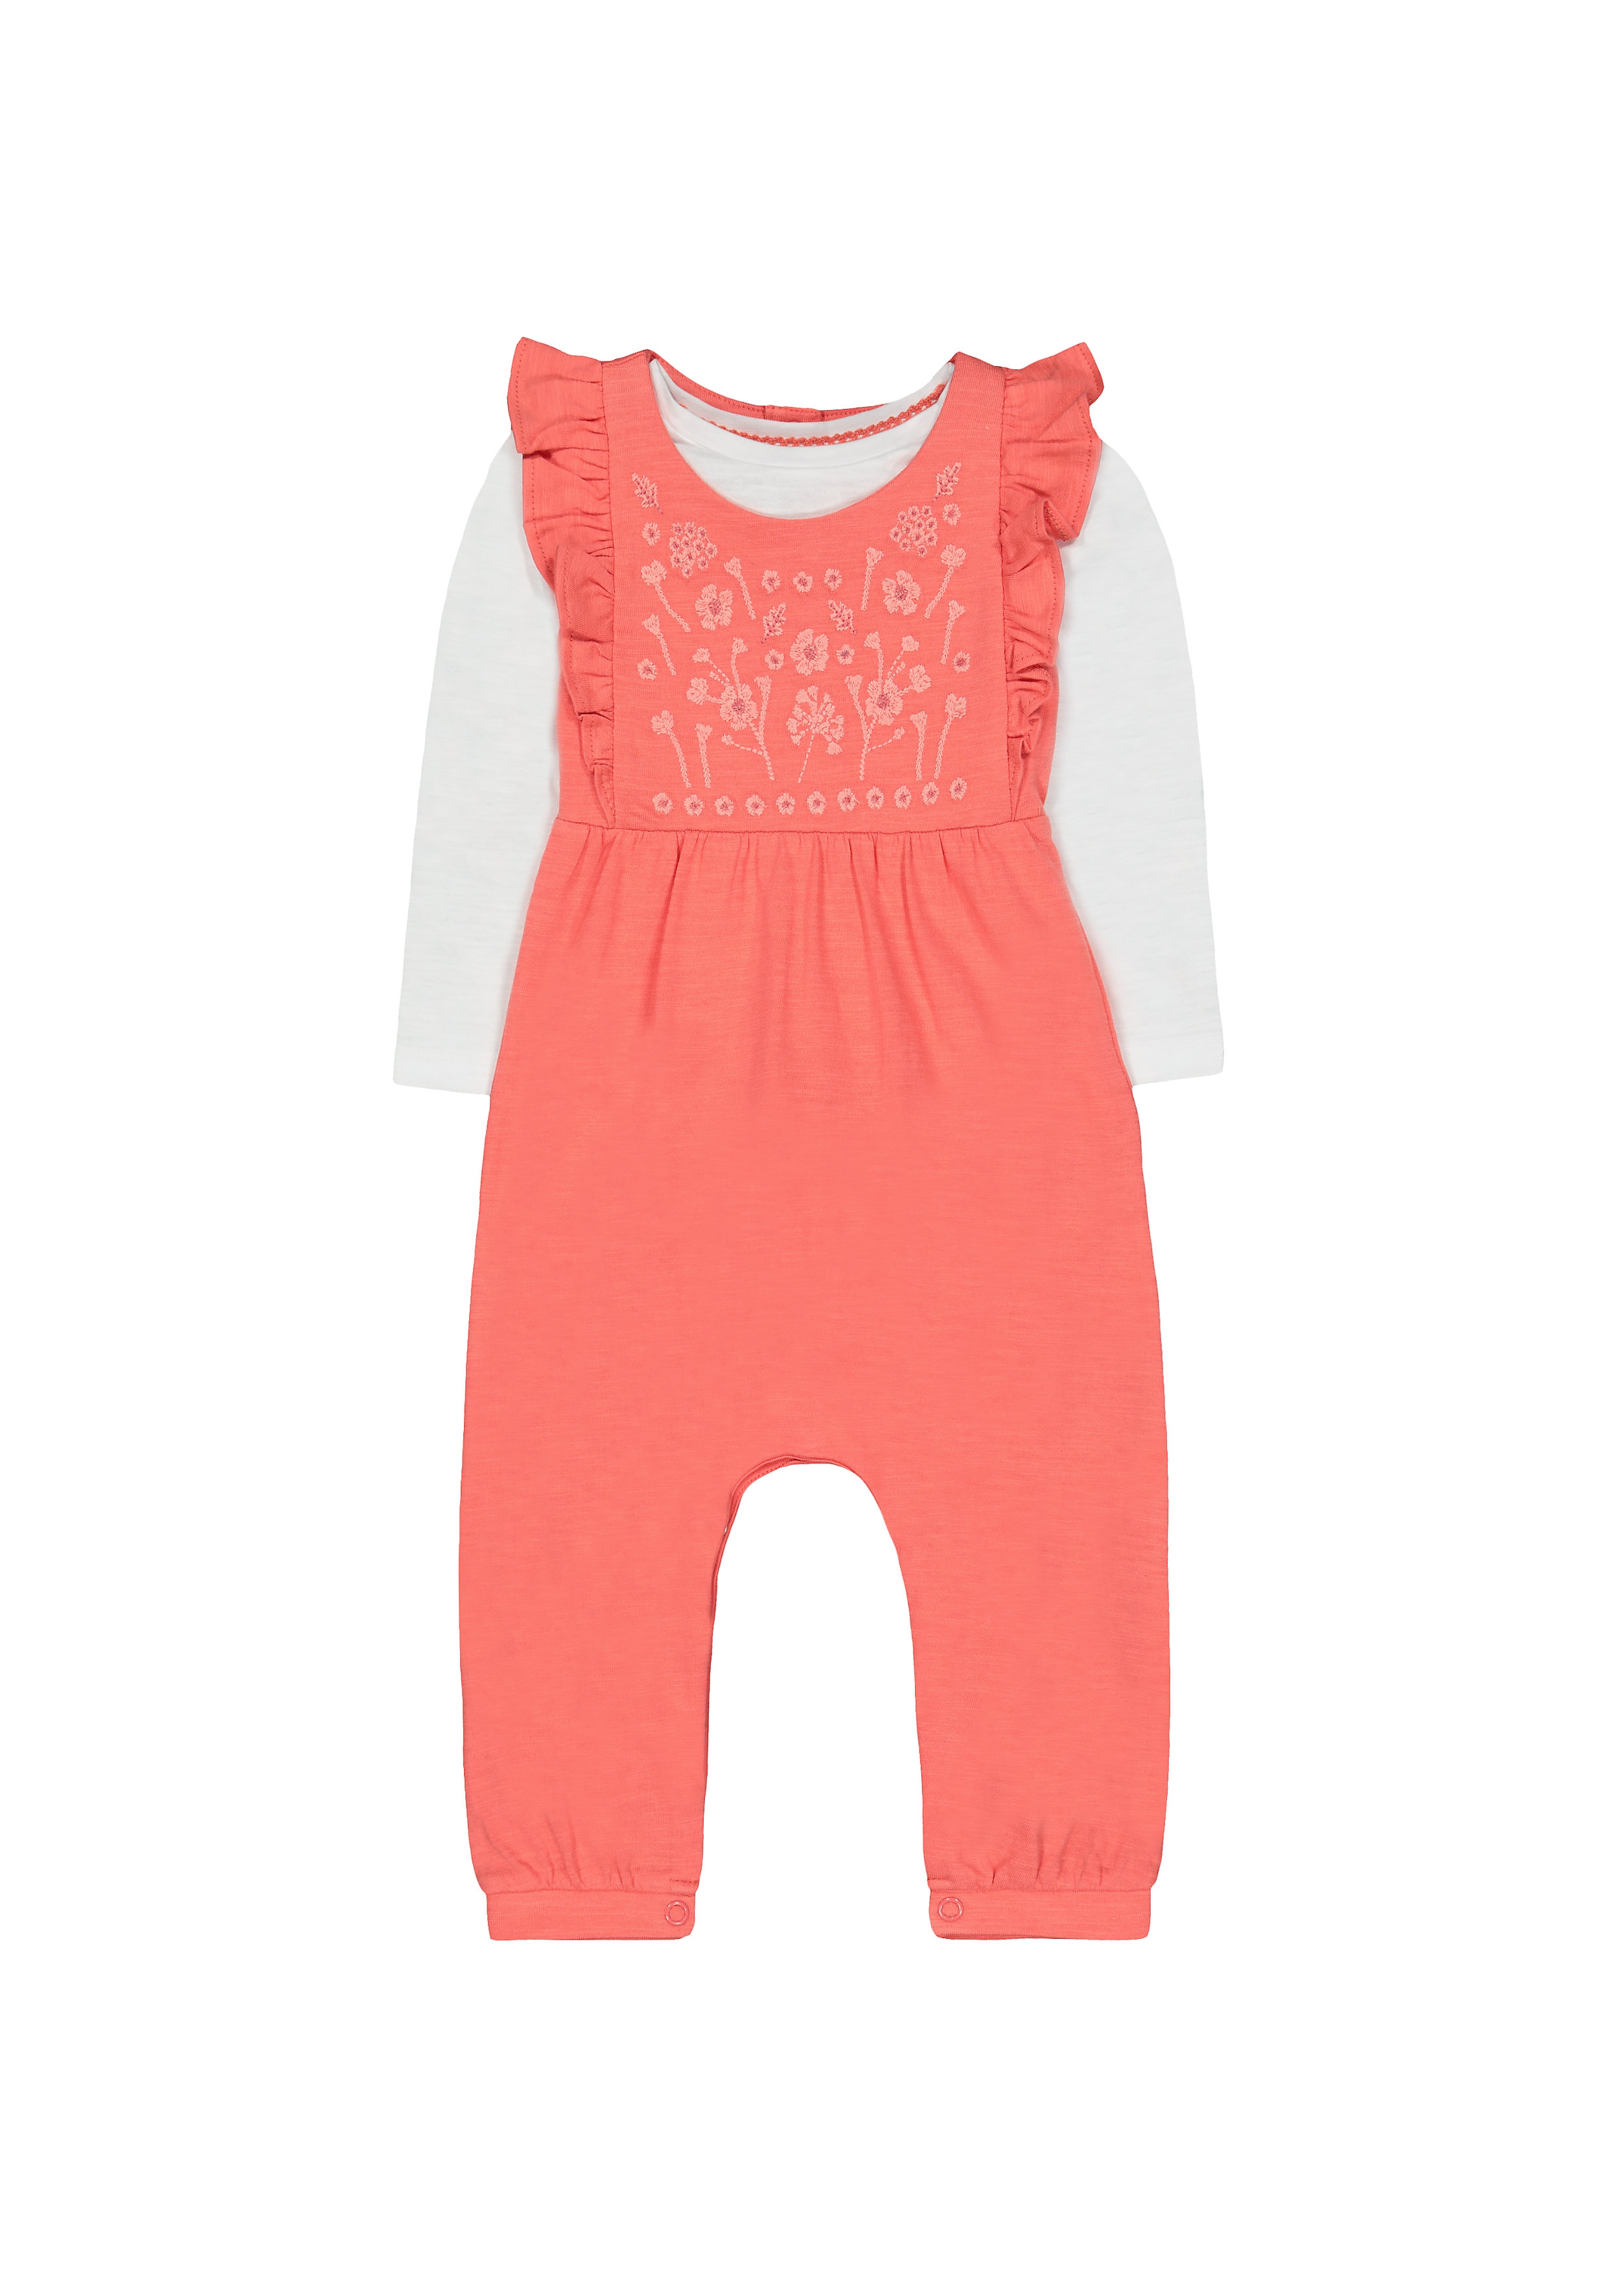 Mothercare | Girls Full Sleeves Dungaree Set Floral Embroidery - Coral 0